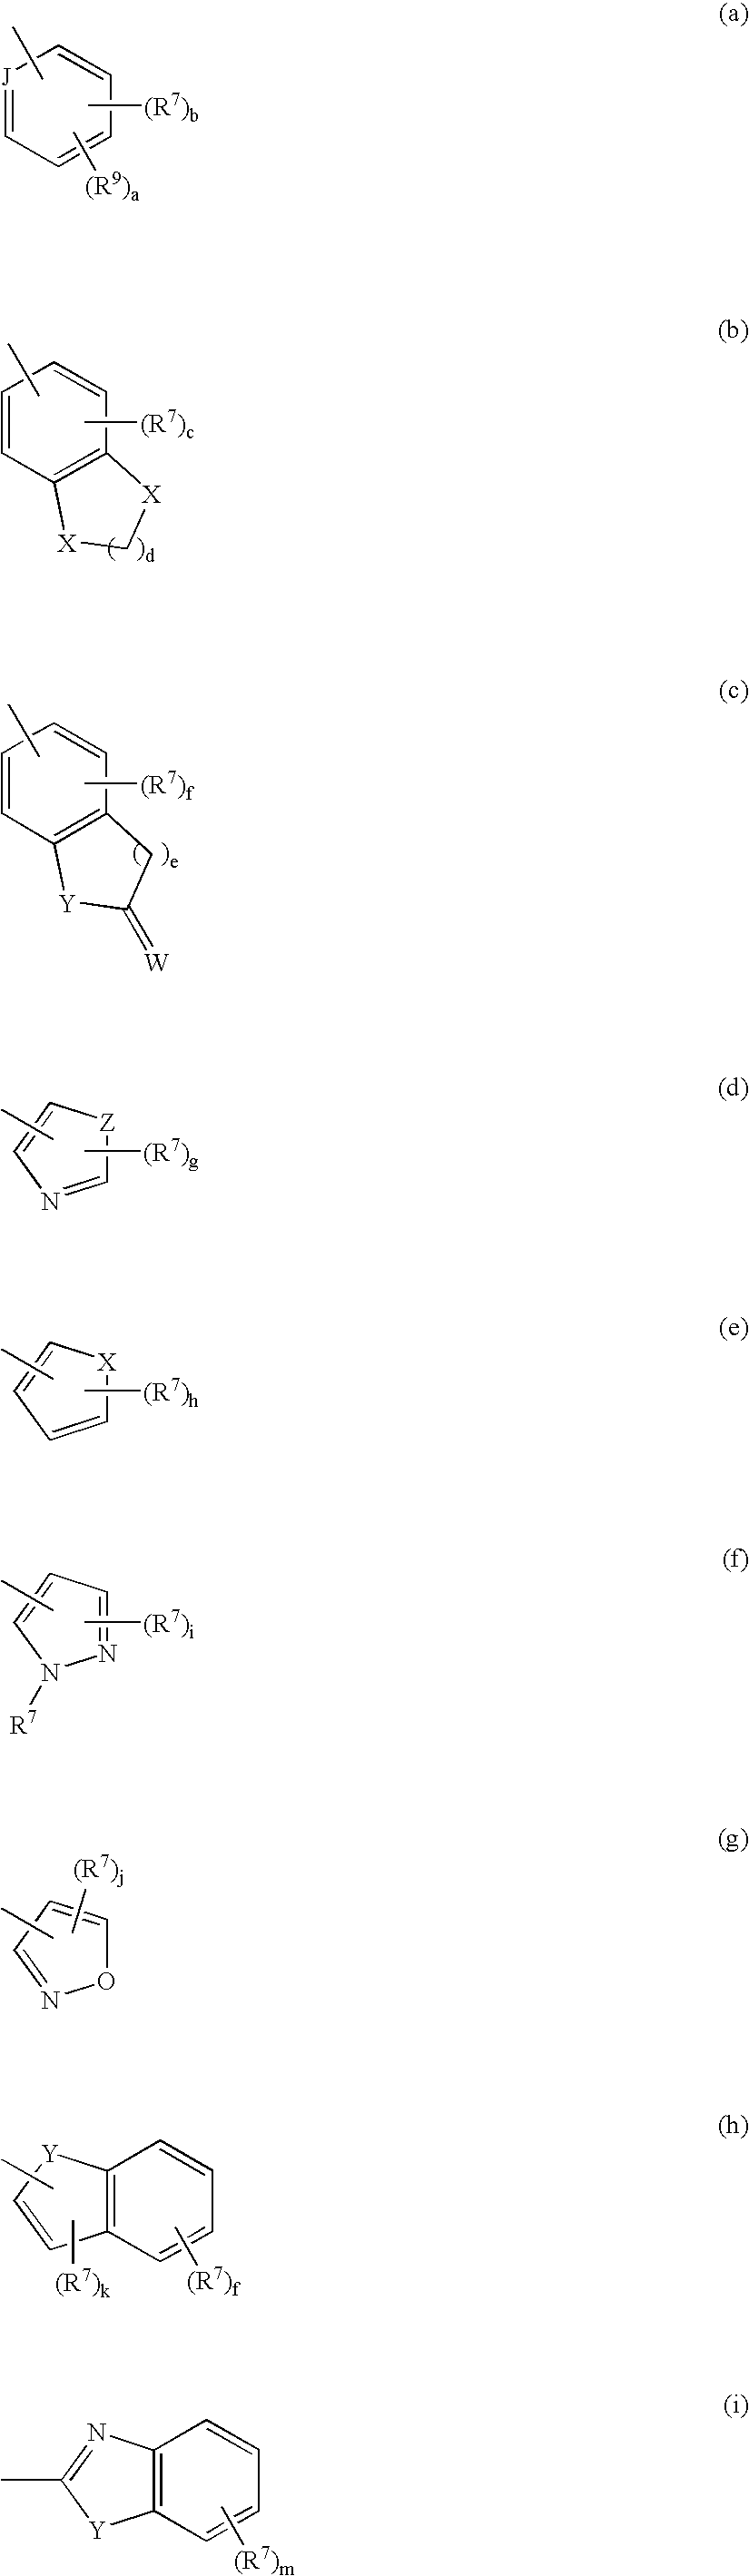 6' substituted compounds having 5-ht6 receptor affinity